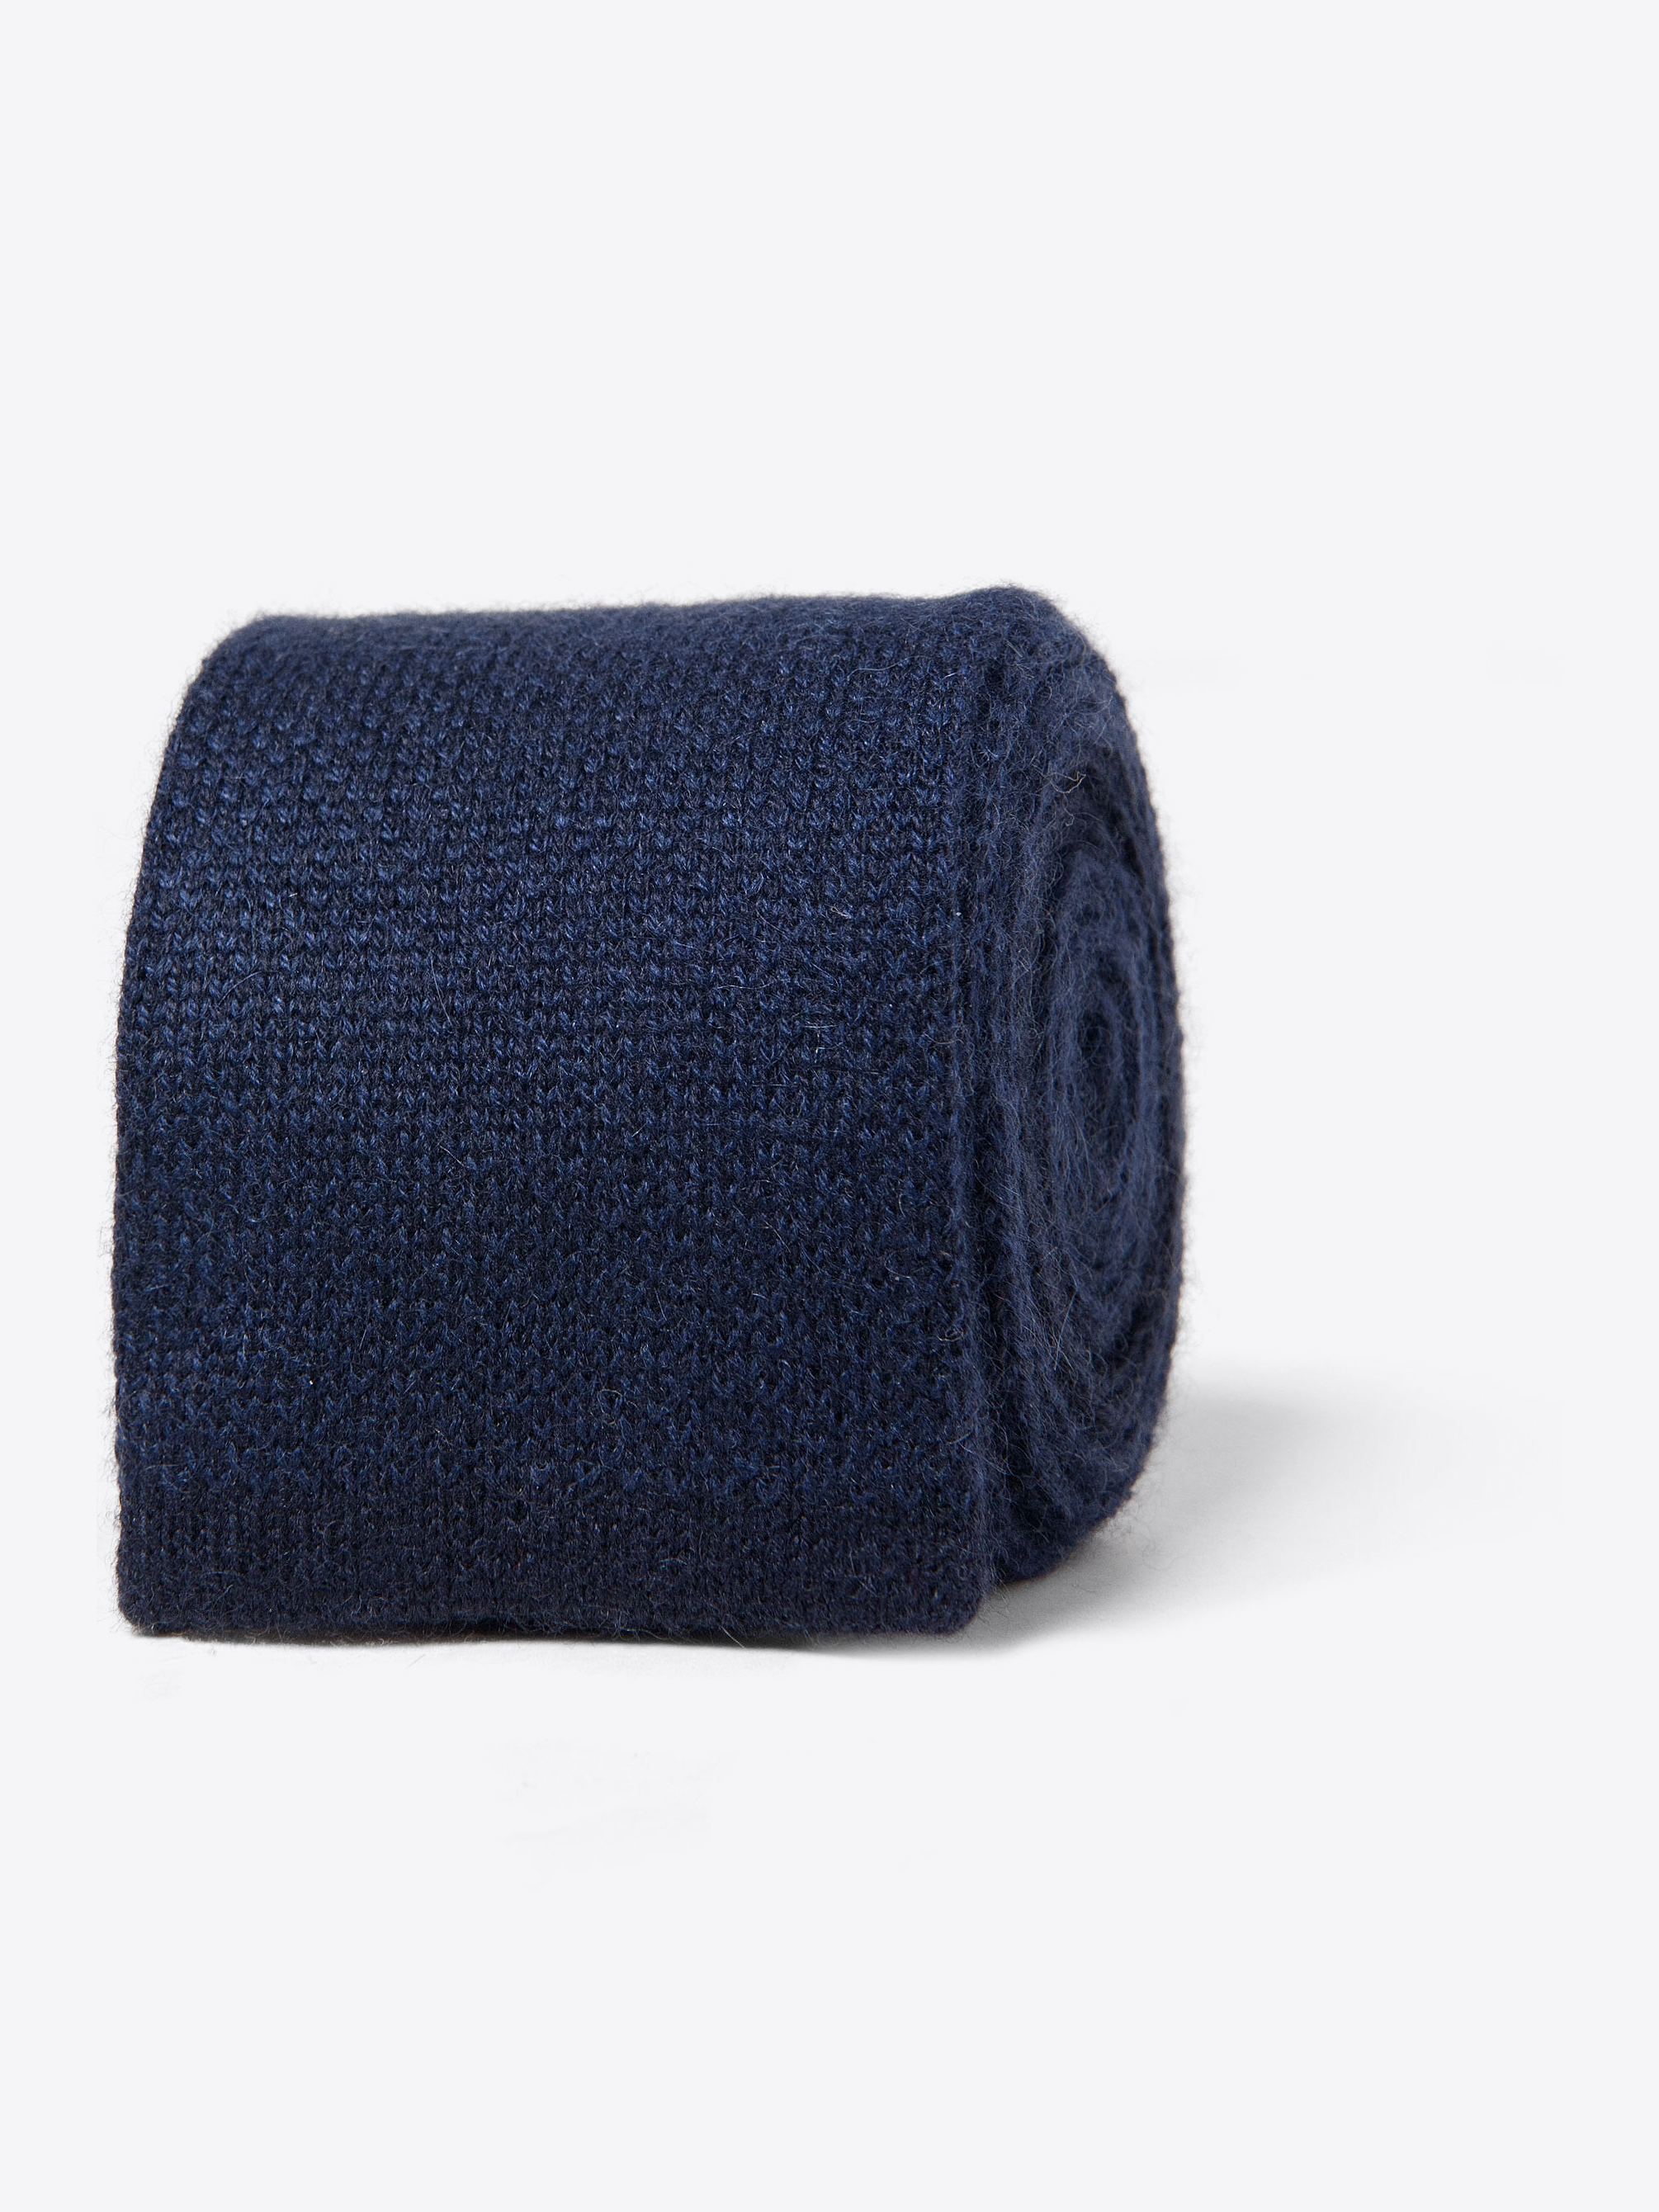 Zoom Image of Navy Cashmere Knit Tie